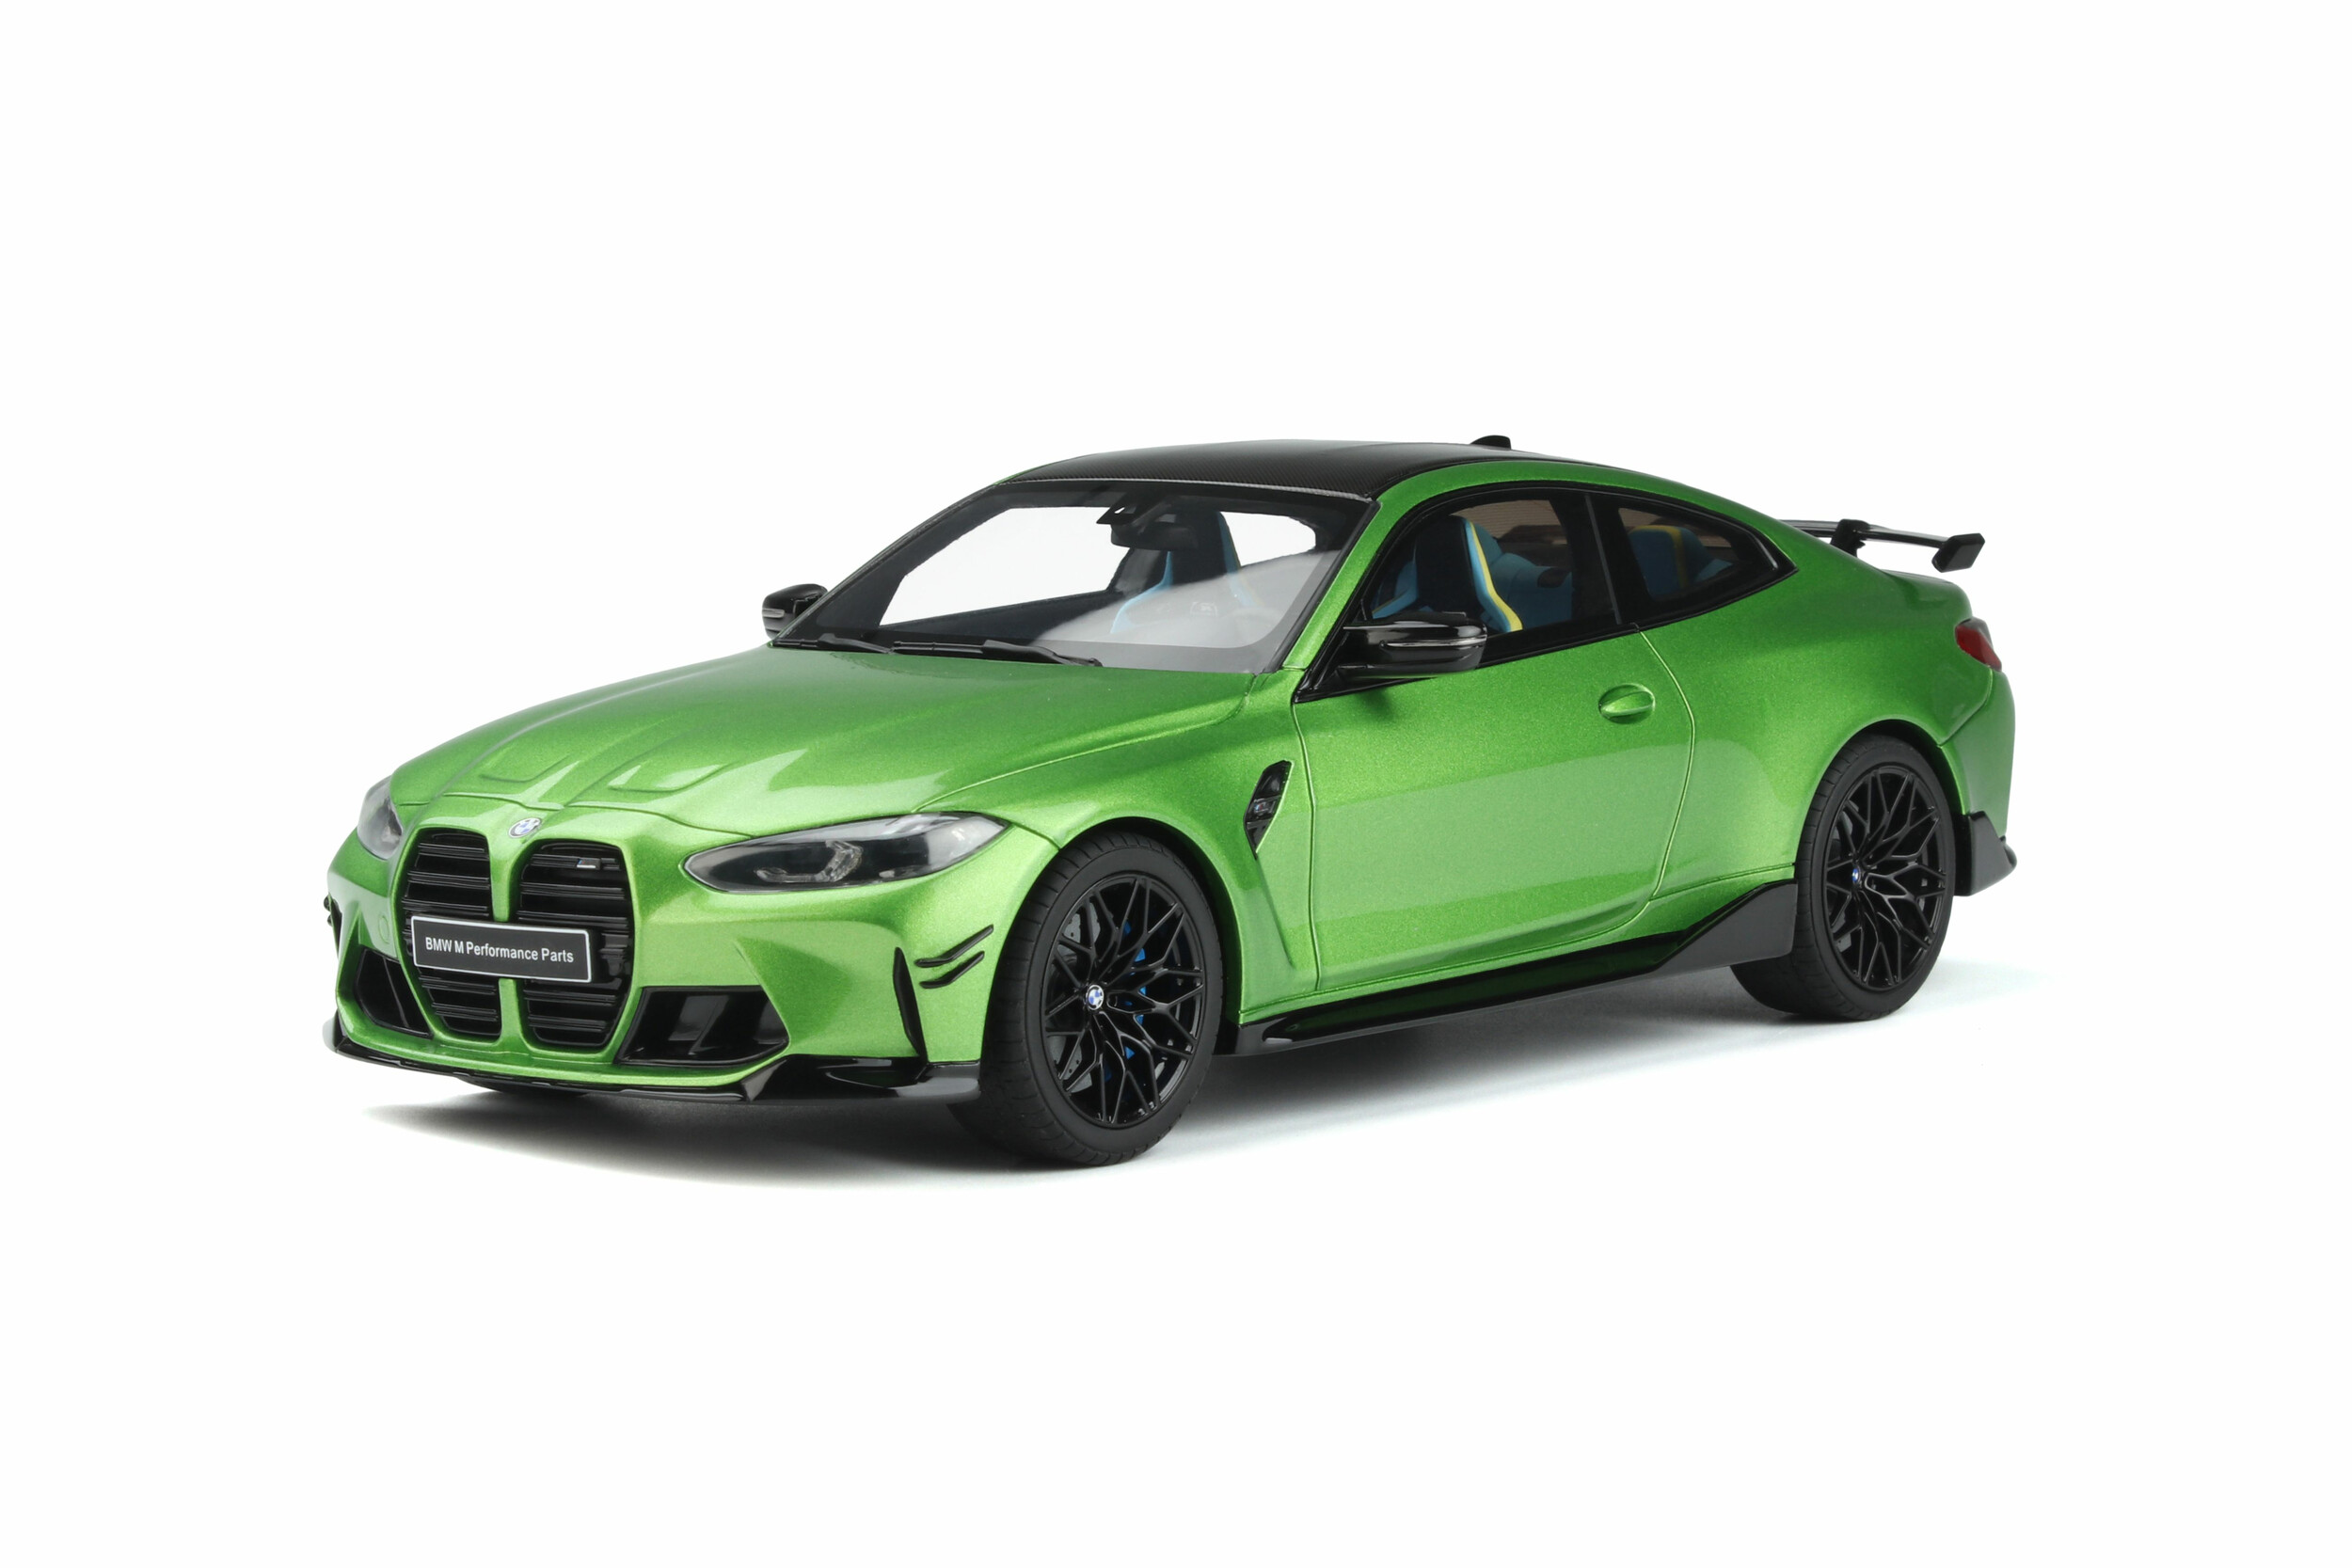 Exclusive Photos: M Performance Parts for the 2021 BMW M3 / M4